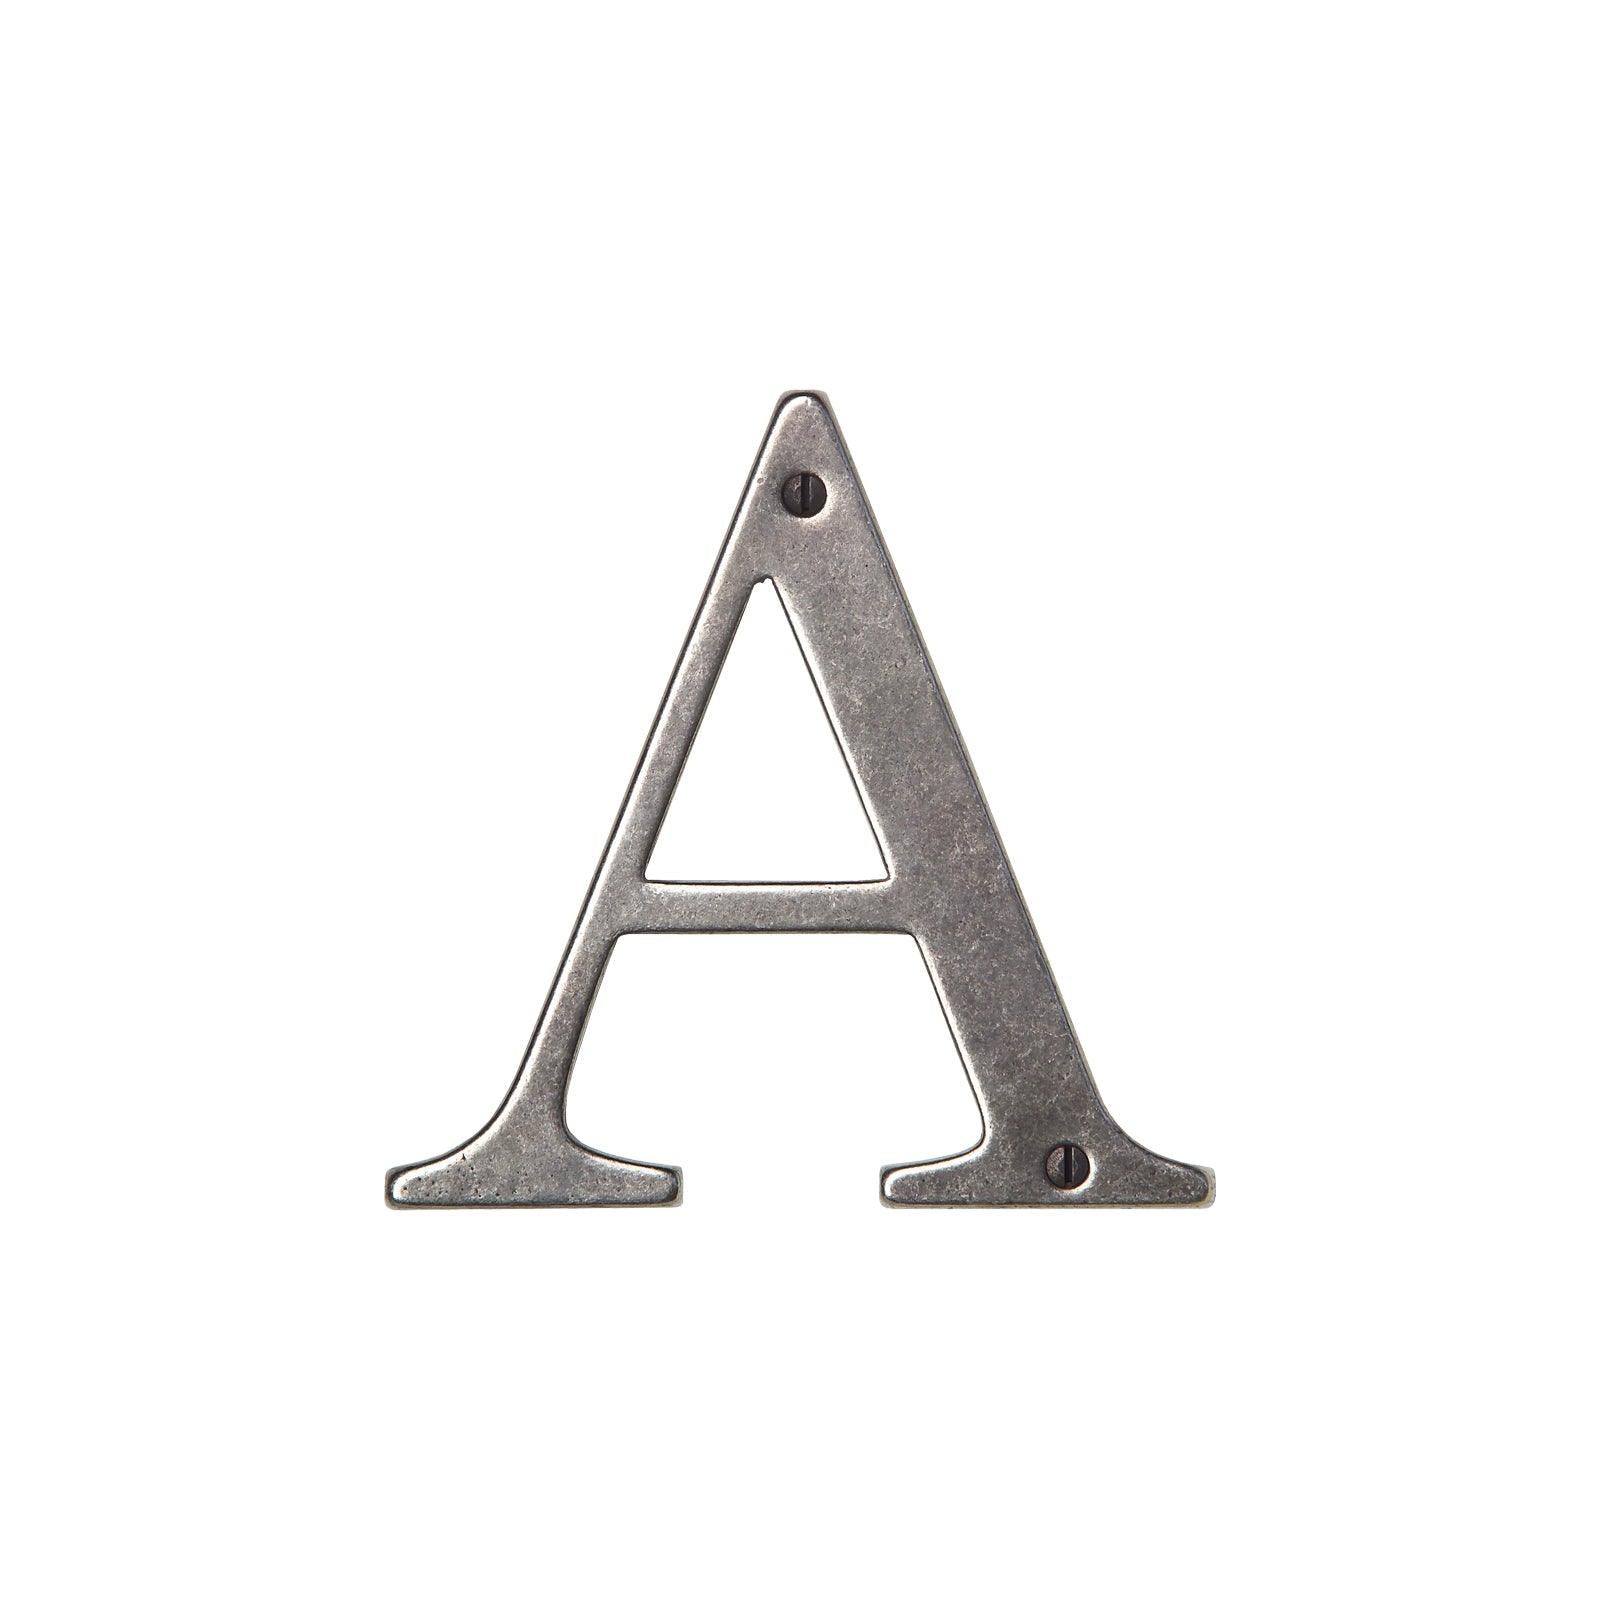 L400W - 4" House Letter “W" - Discount Rocky Mountain Hardware